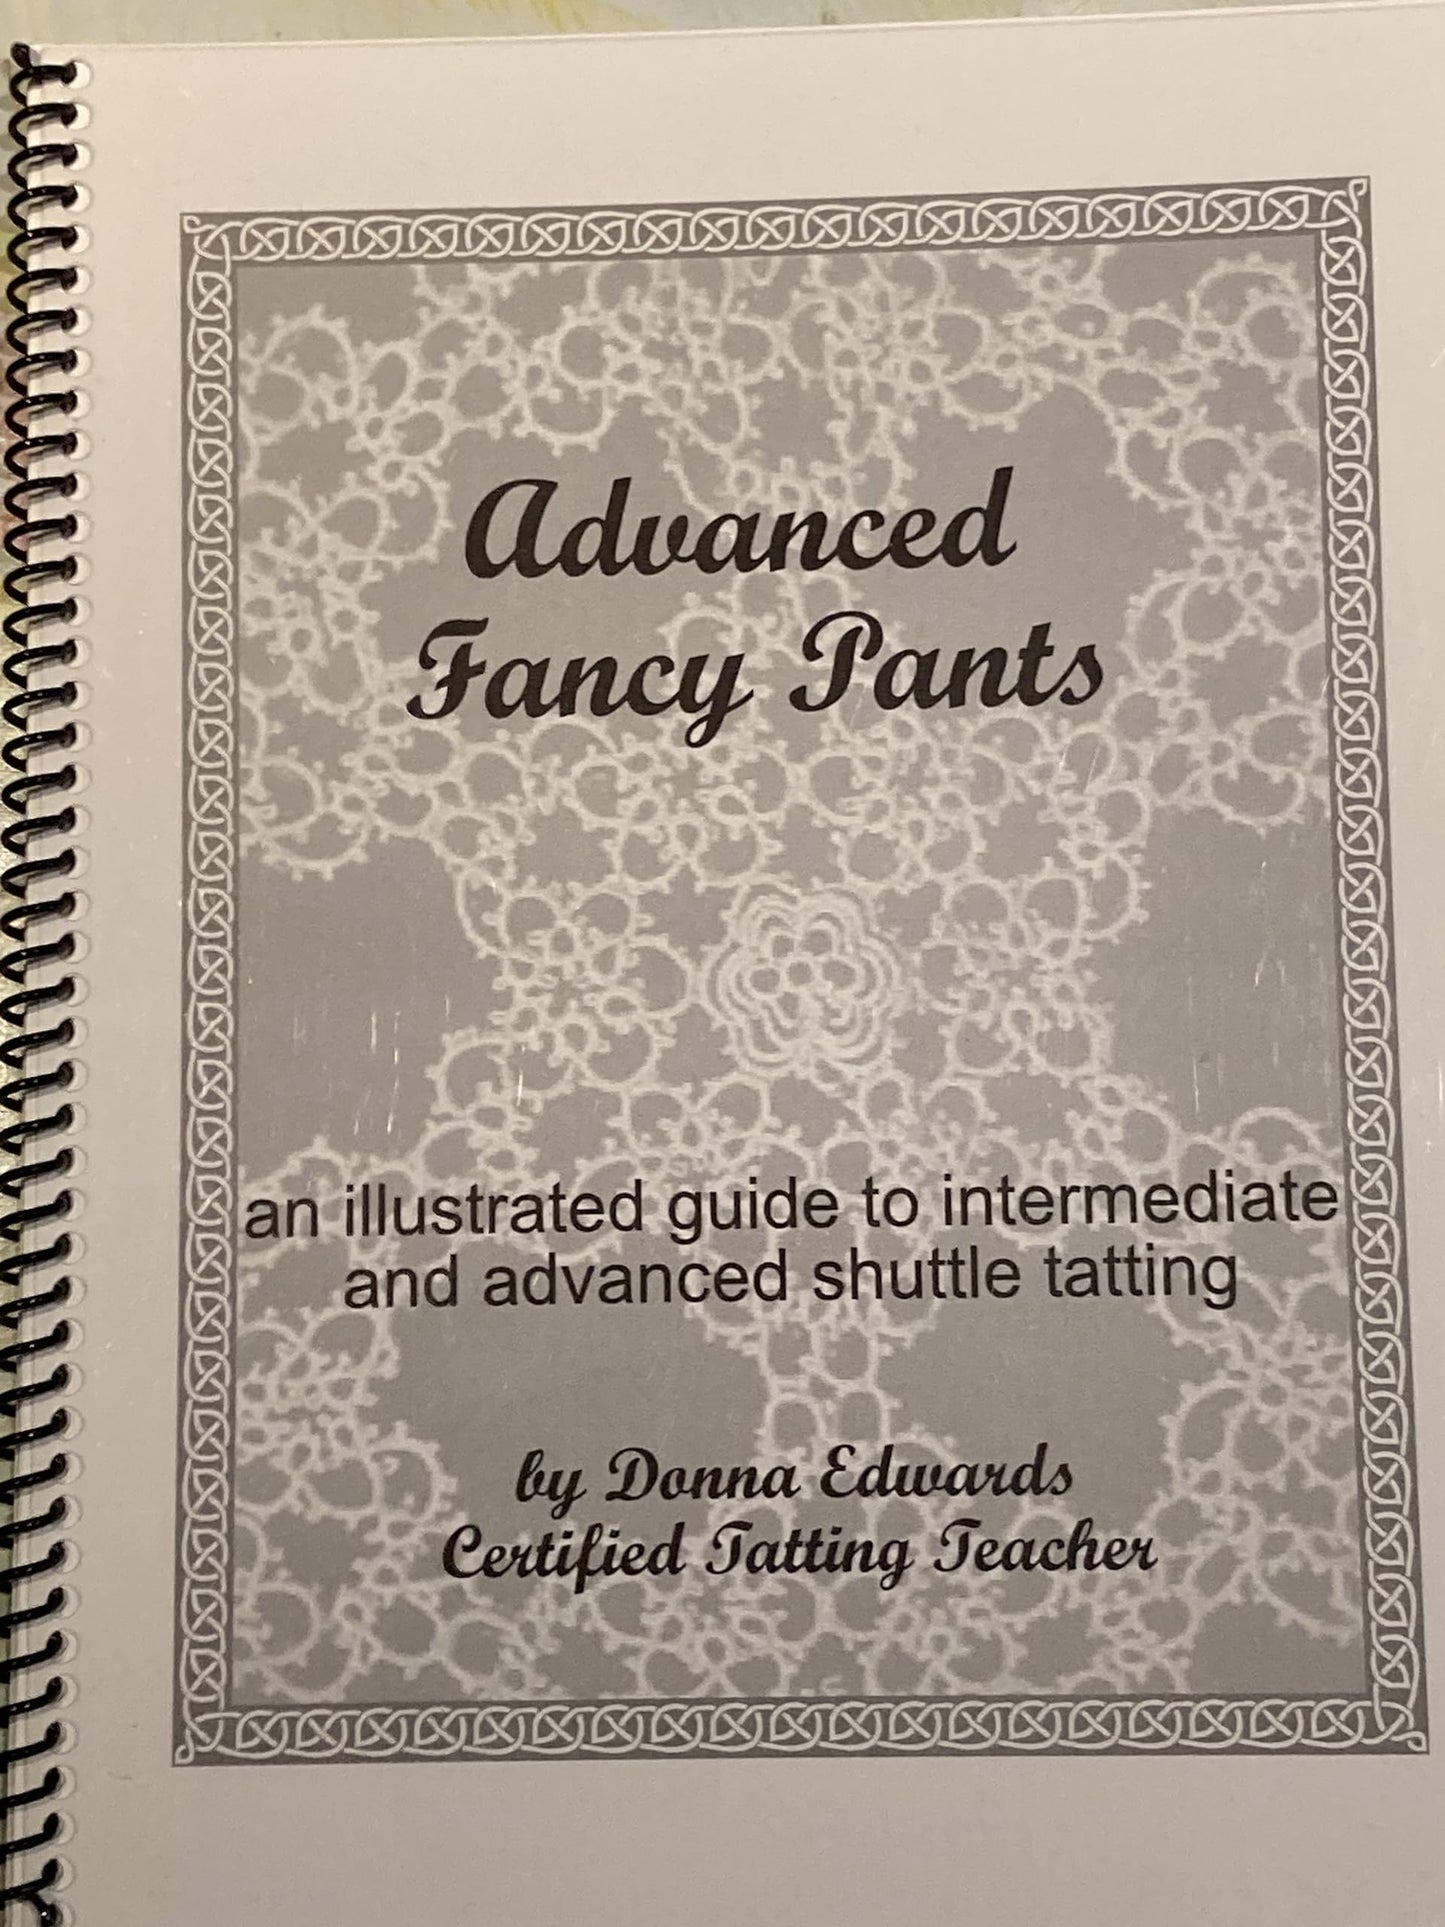 Advanced Fancy Pants - An Illustrated Guide To Intermediate and Advanced Shuttle Tatting Techniques